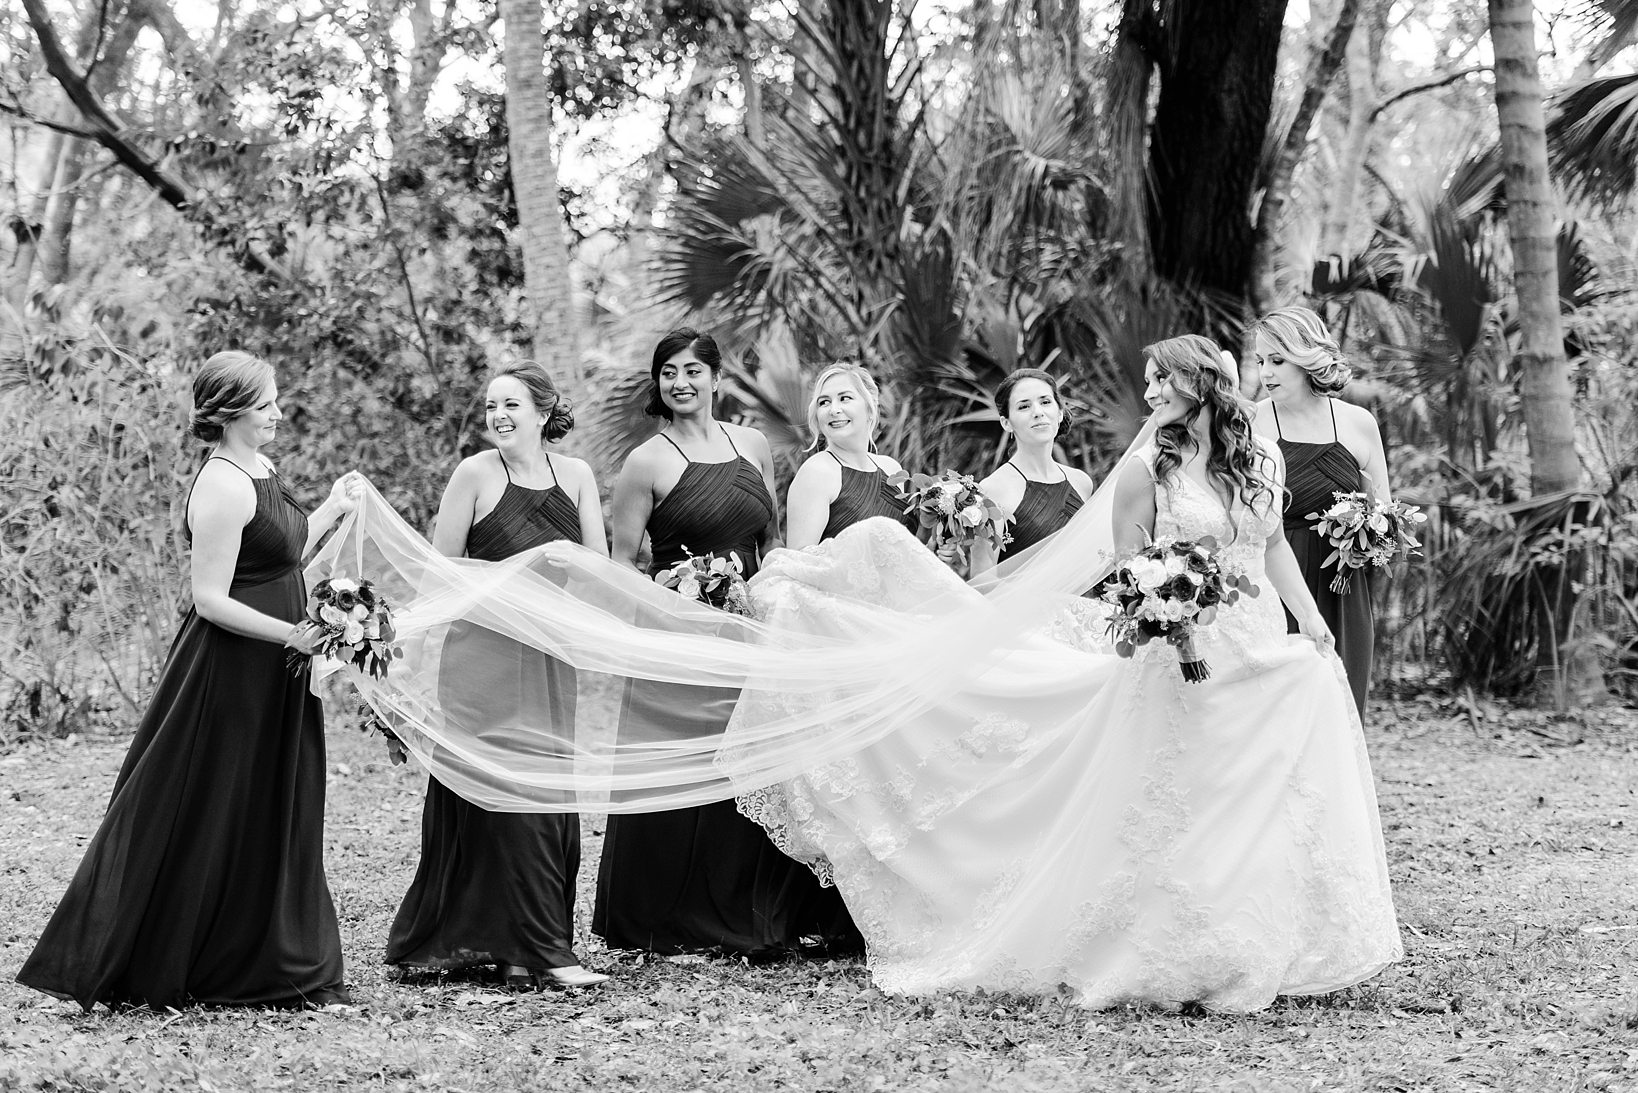 Black and White photo of the Bride and her Bridesmaids walking through the rustic woods in dunedin, FL